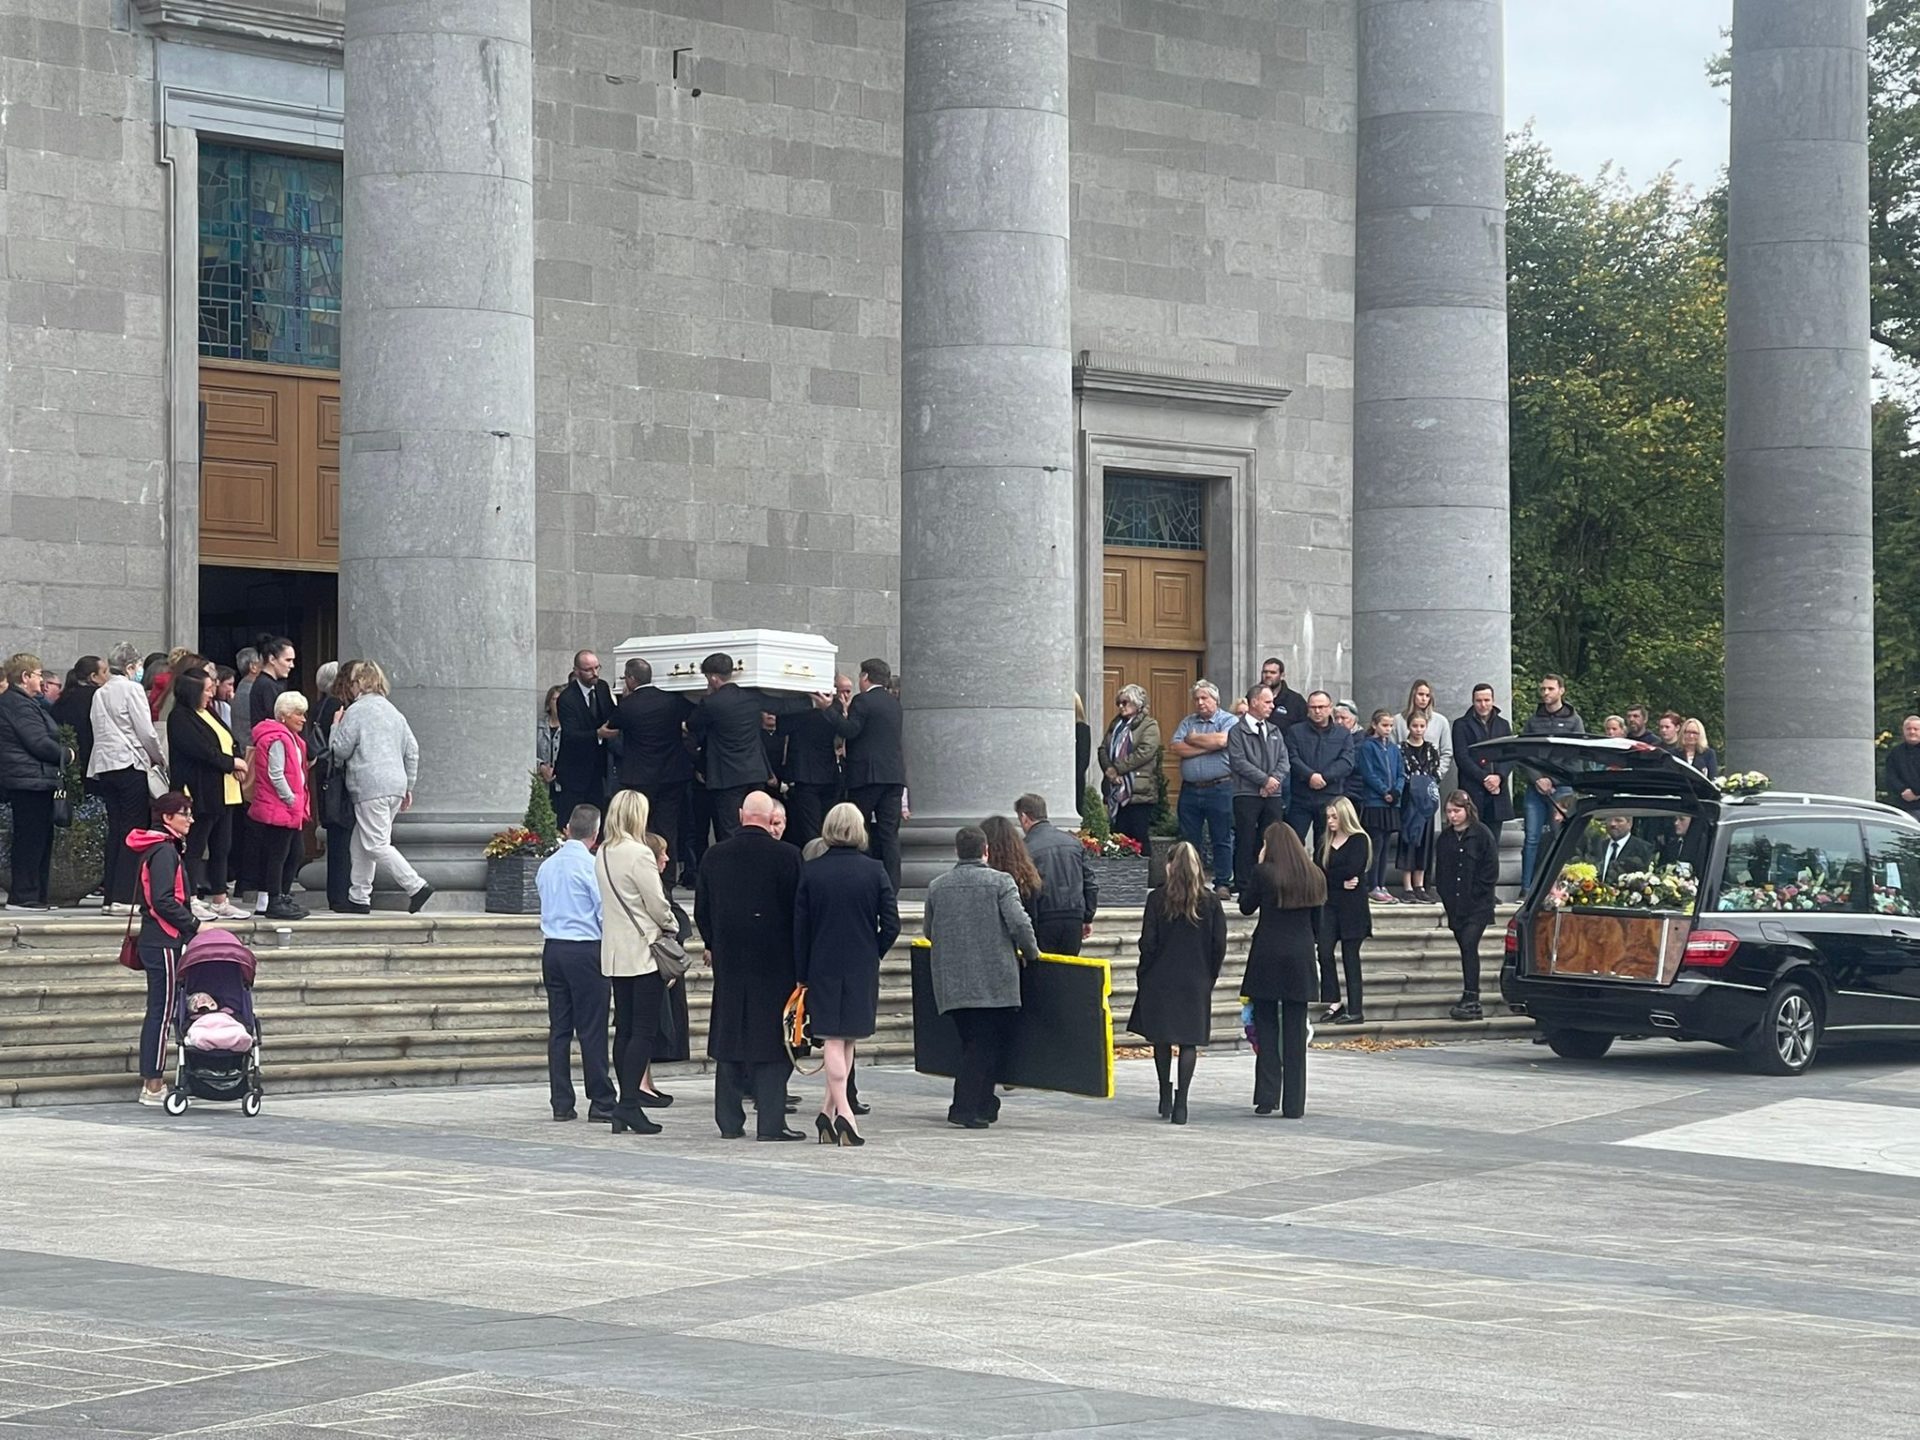 Mourners at the funeral of Thelma and Mikey Dennany at St Mel’s Cathedral in Longford, 15-09-2022. Image: Barry Whyte/Newstalk